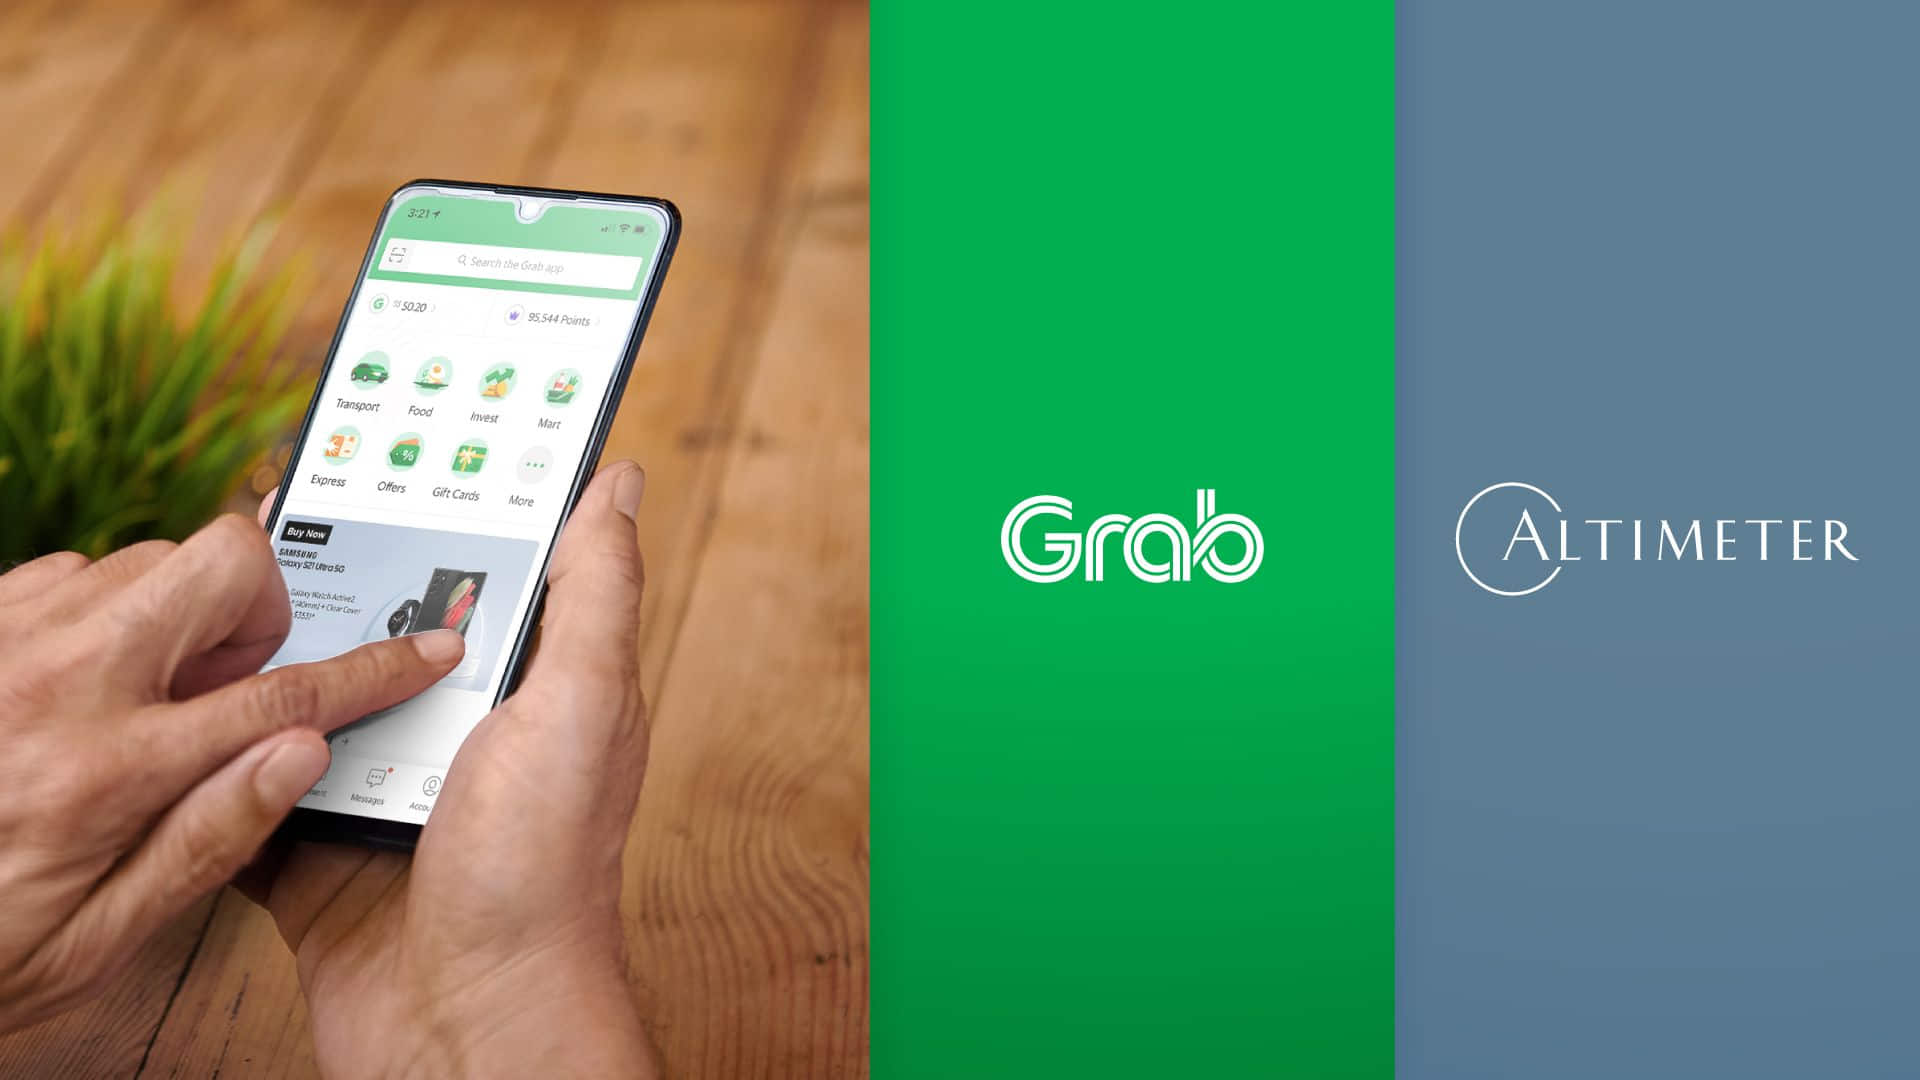 Singapore-based Grab Holdings to go public in $40bn SPAC merger